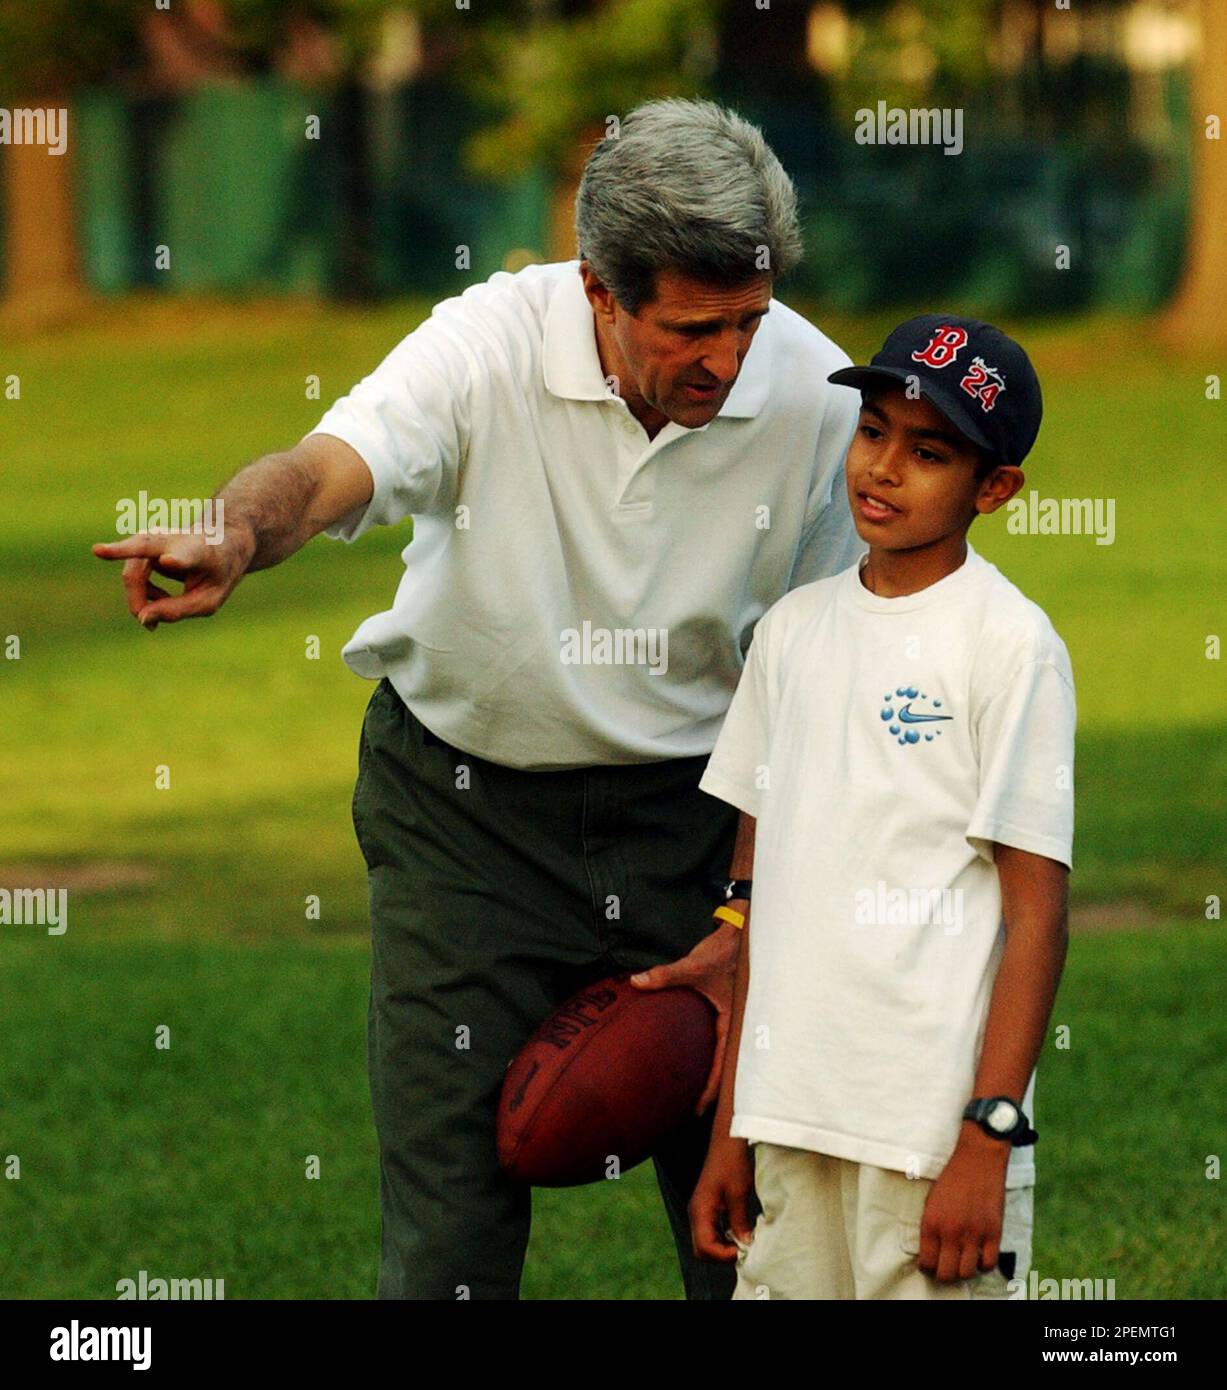 Democratic Presidential candidate Sen. John Kerry, D-Mass, calls out a play to Karan Singhal, 11, of Boston as he plays a game of football on the Esplanade in Boston Saturday, Sept. 25, 2004. (AP Photo/Gerald Herbert) Stock Photo